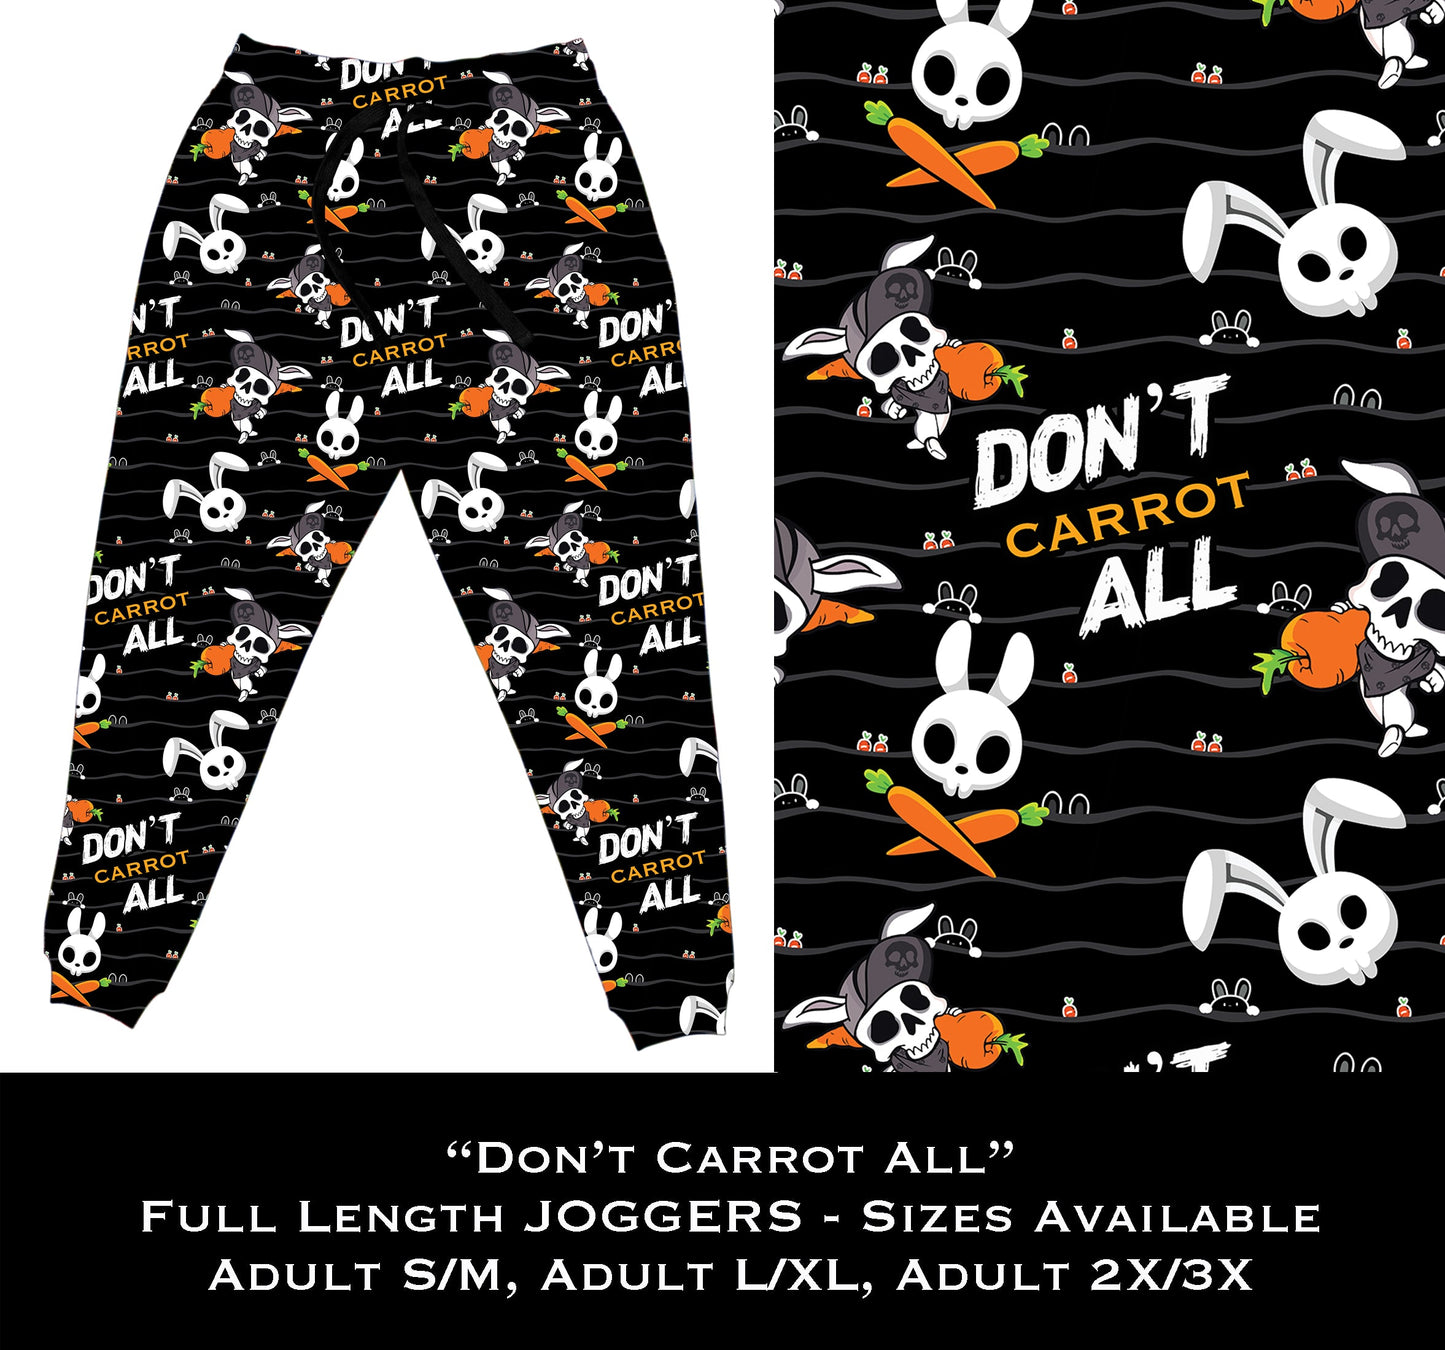 Don't Carrot All - Full Joggers